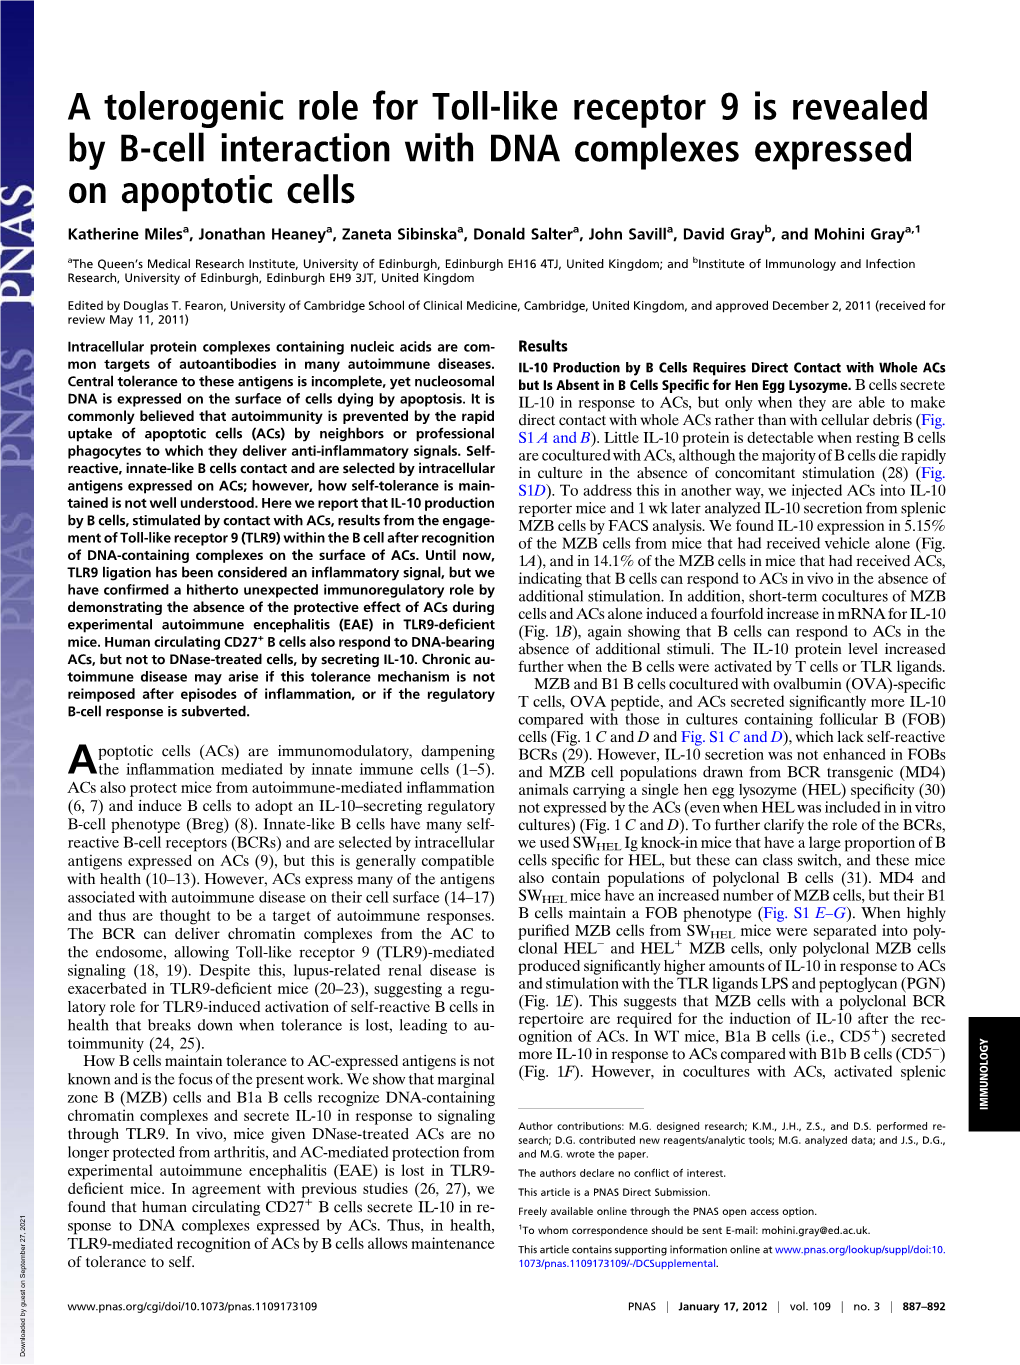 A Tolerogenic Role for Toll-Like Receptor 9 Is Revealed by B-Cell Interaction with DNA Complexes Expressed on Apoptotic Cells